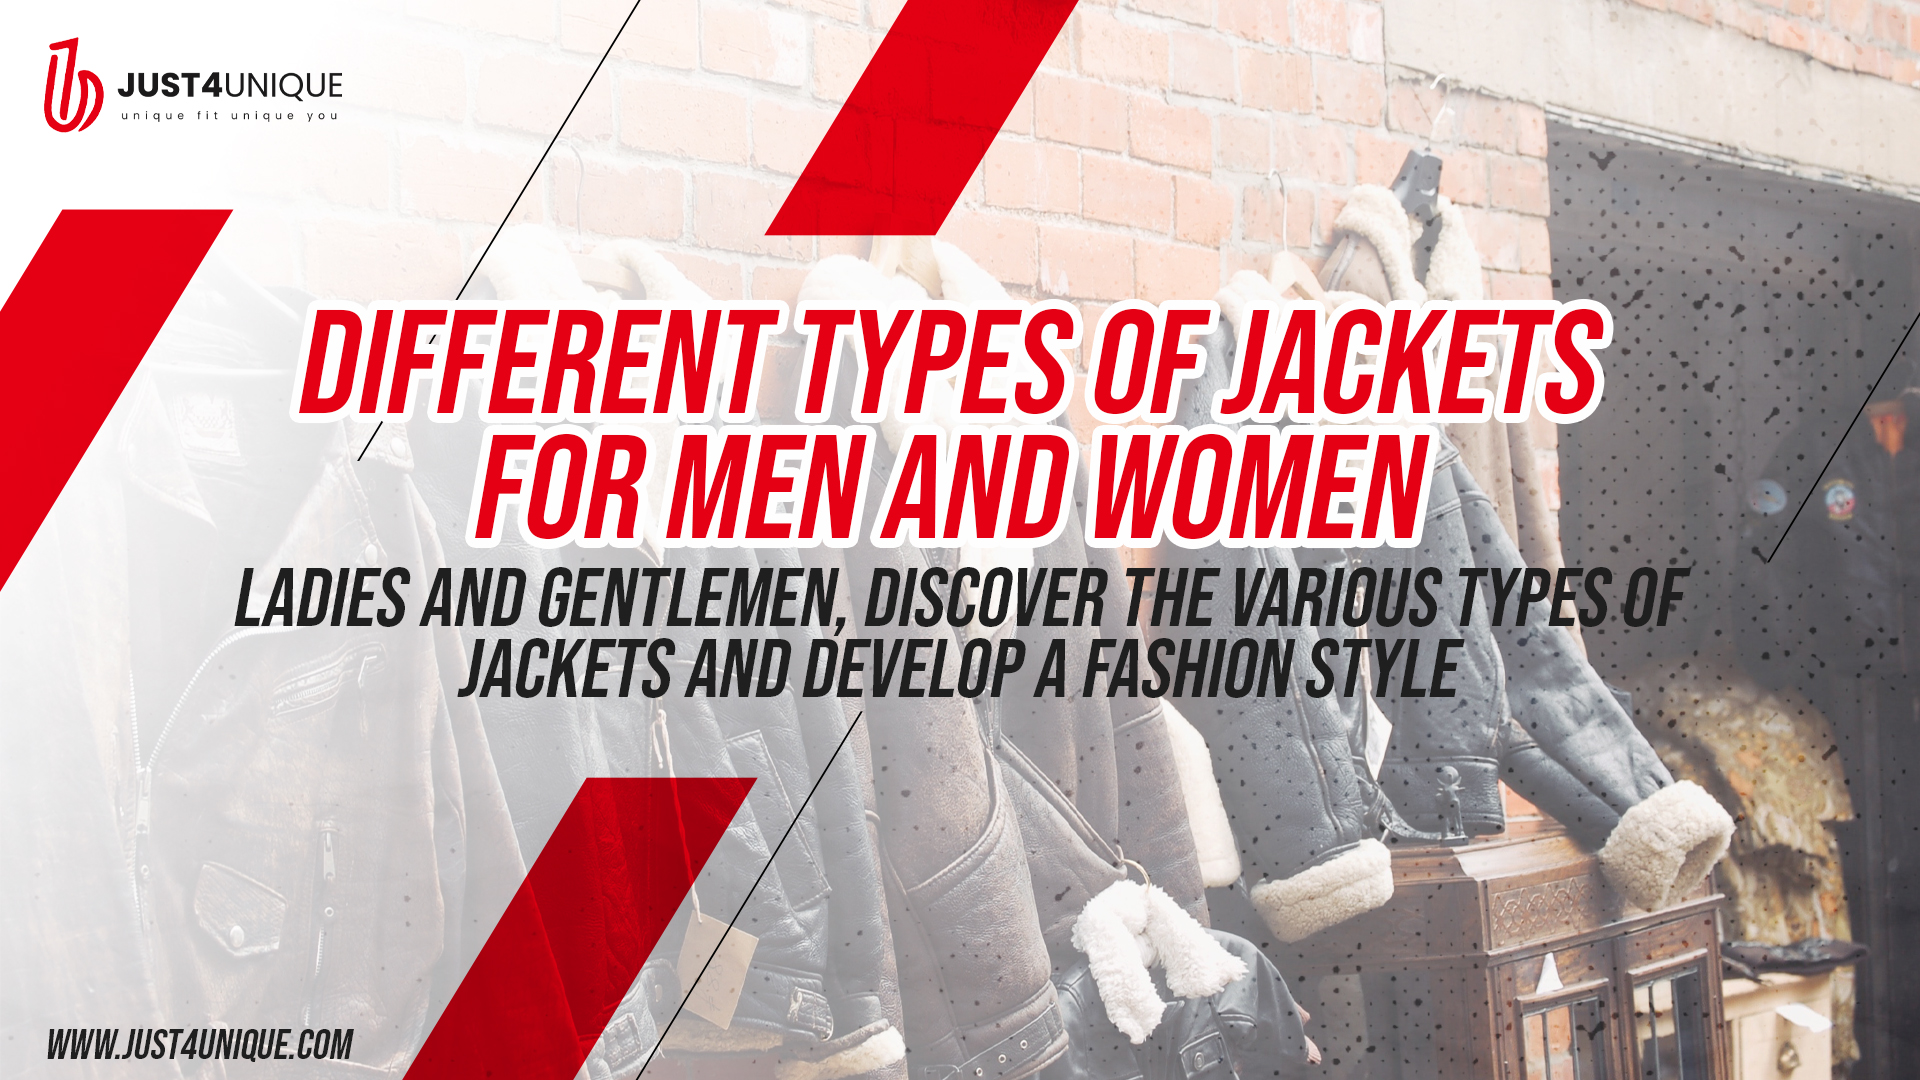 Different Types of Jackets for Men and Women